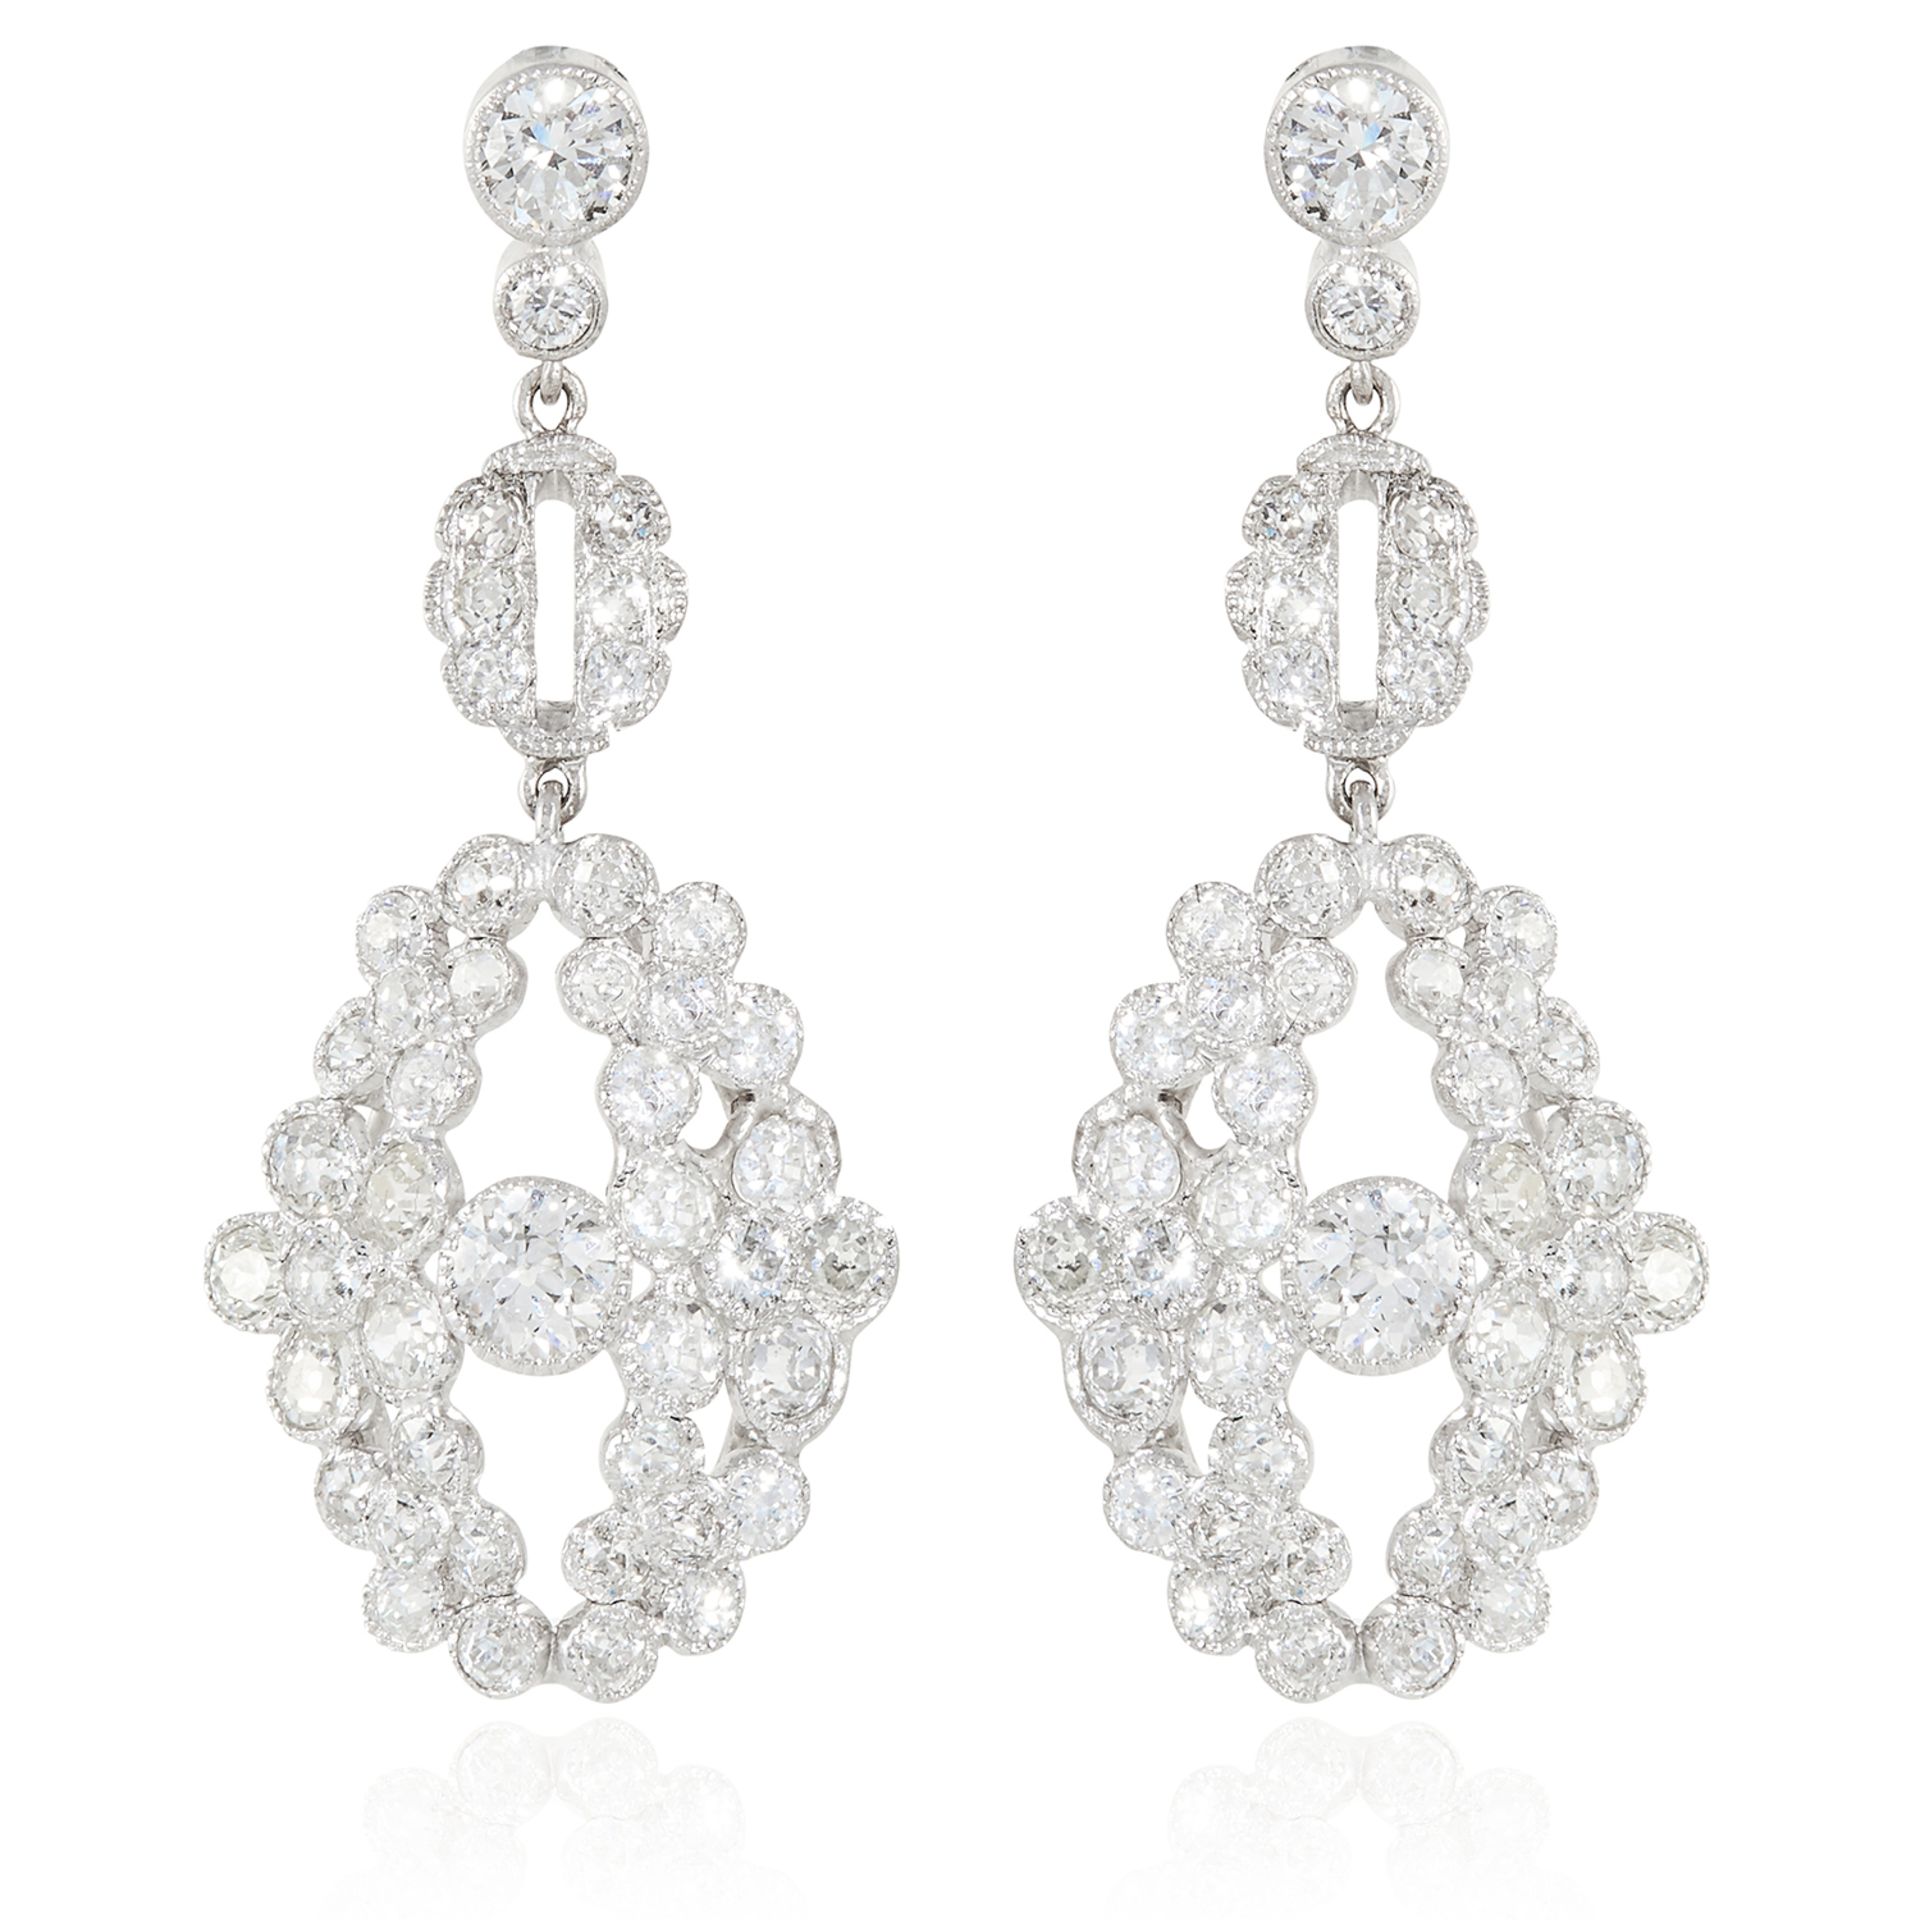 A PAIR OF ANTIQUE 5.25 CARAT DIAMOND EARRINGS in 18ct white gold, each set with a principal old